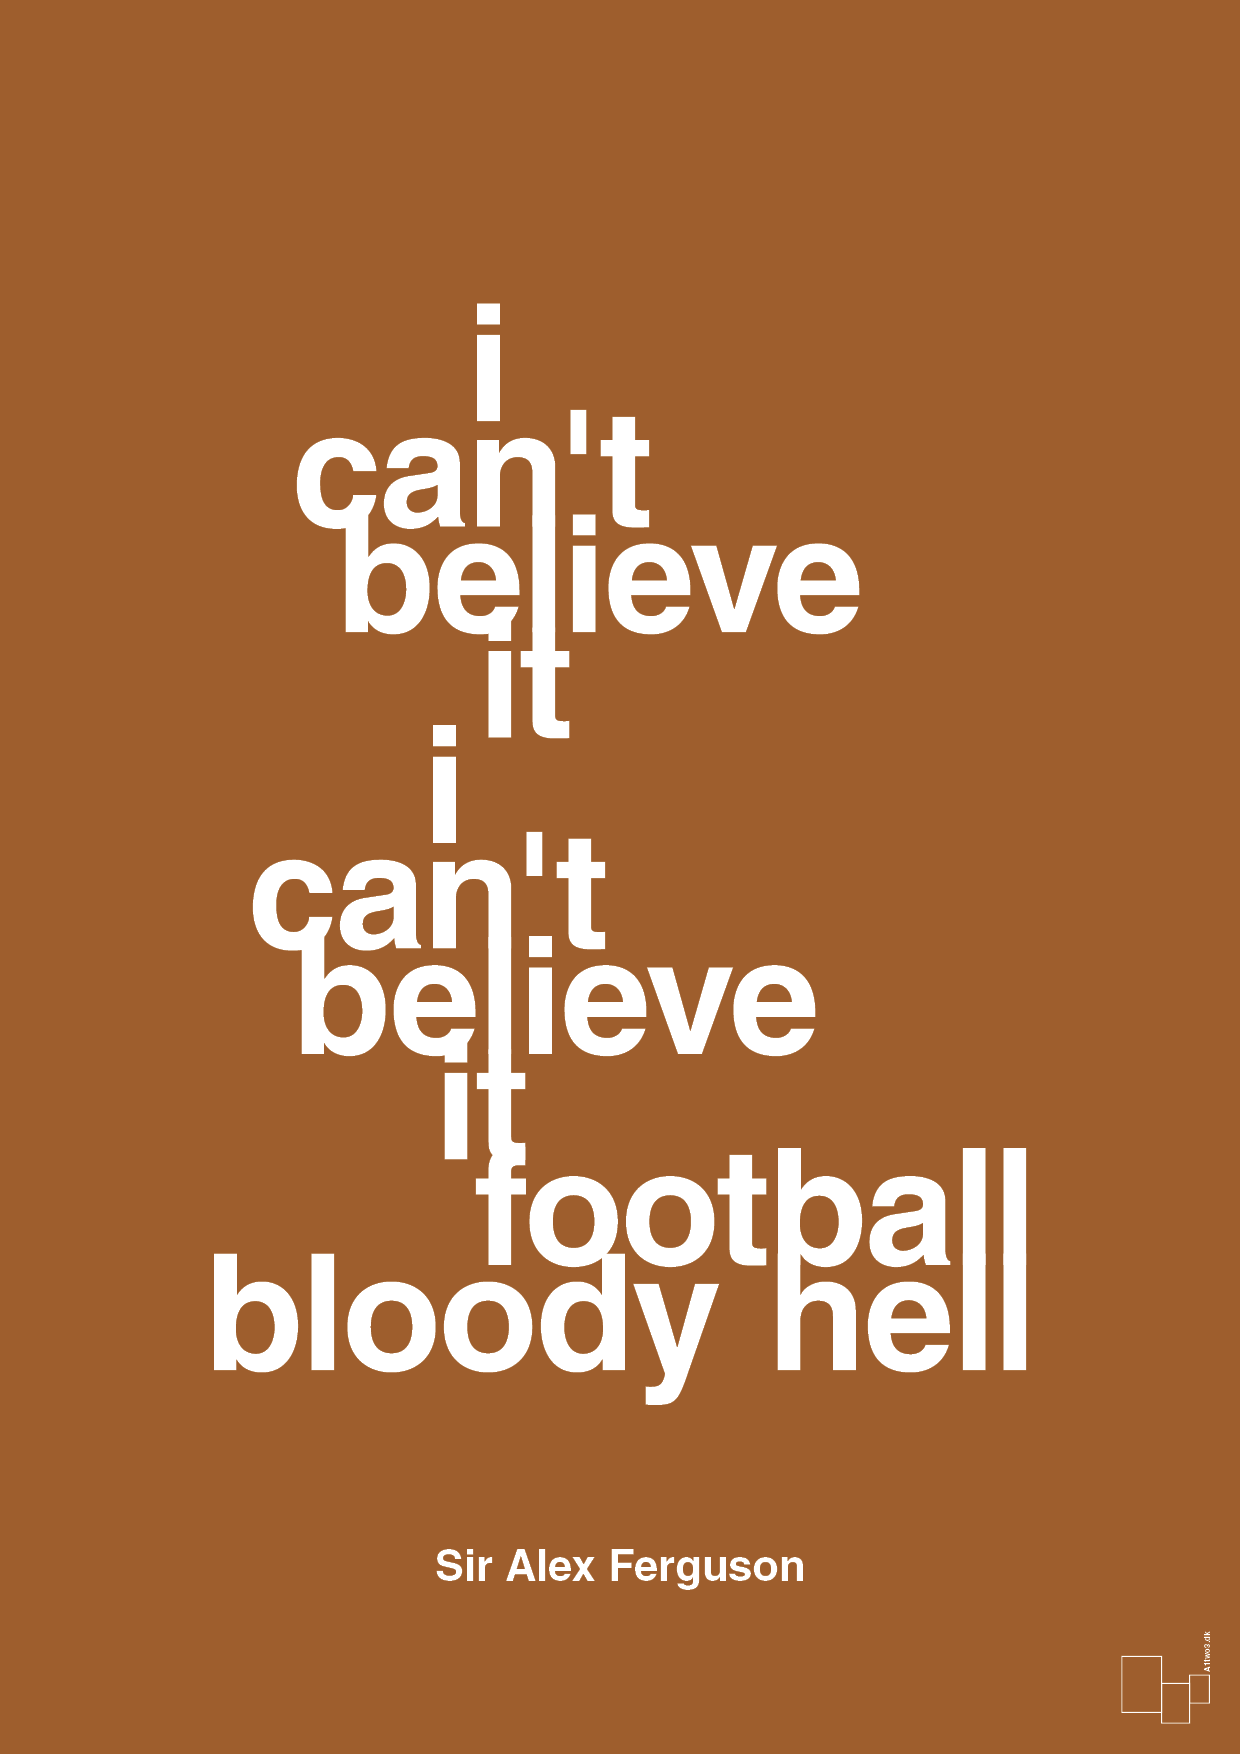 i can't believe it i can't believe it football bloody hell - Plakat med Citater i Cognac